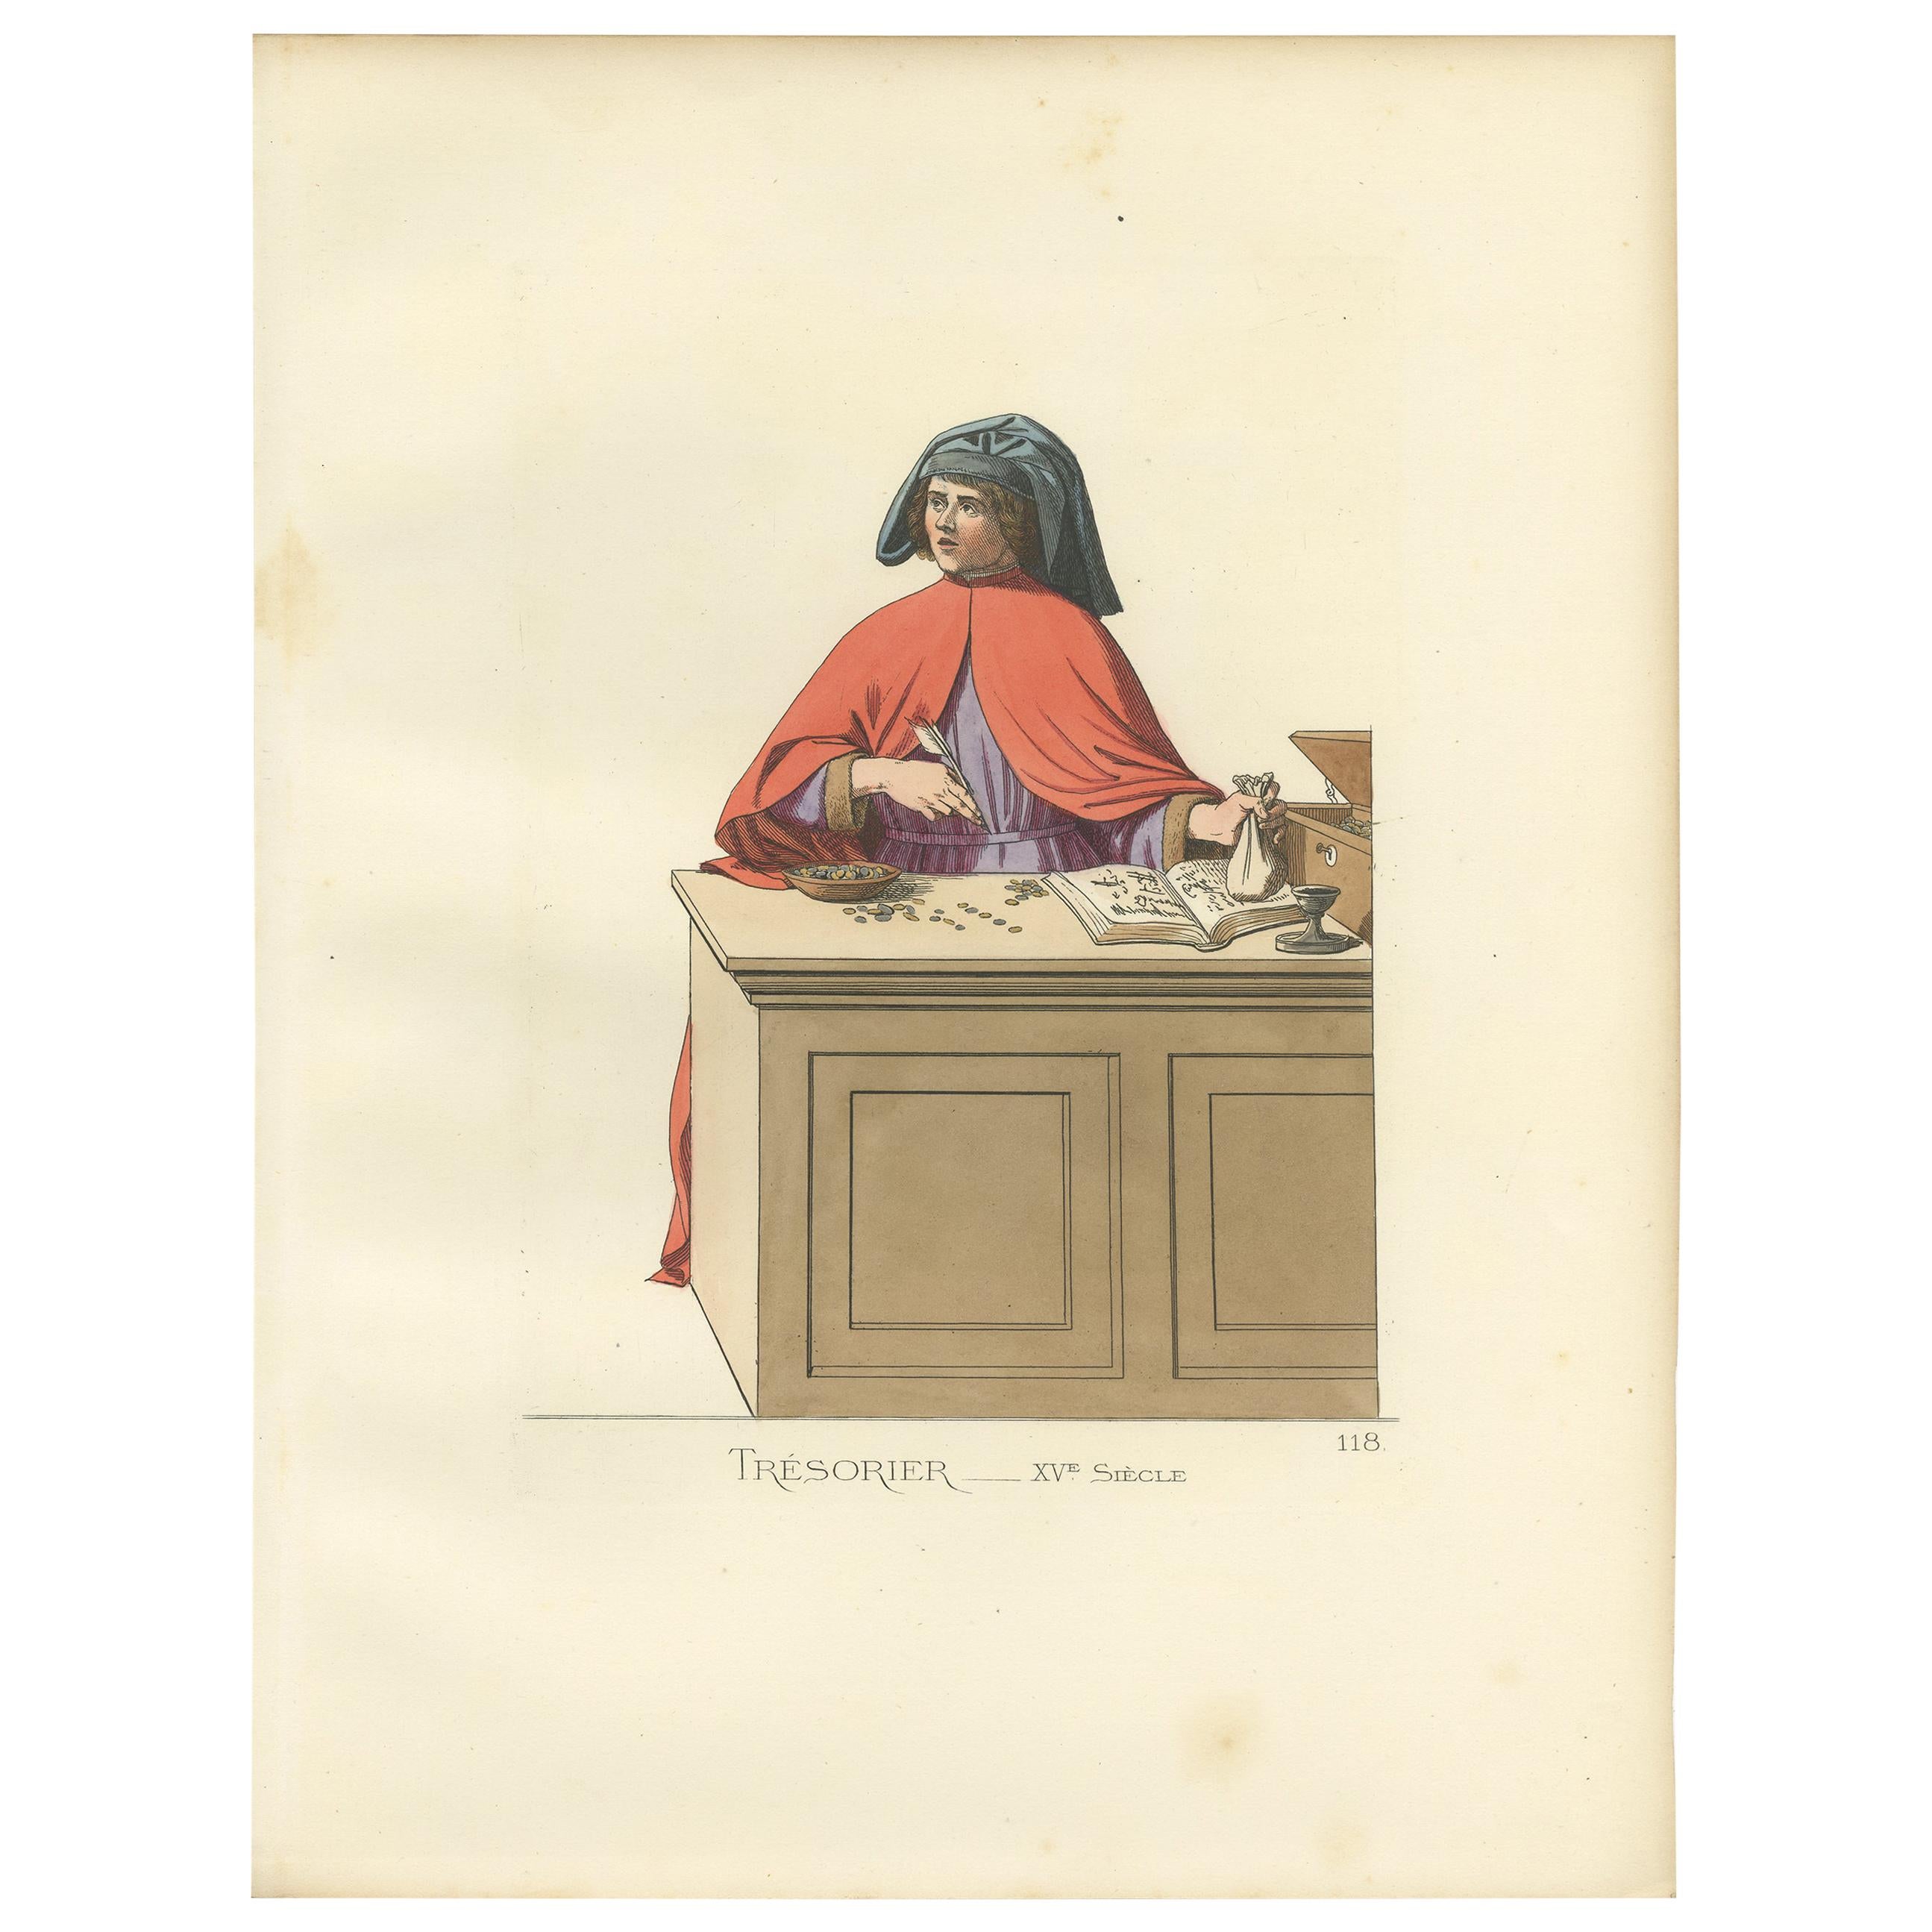 Antique Print of a Treasurer/Bookkeeper, 15th Century, by Bonnard, 1860